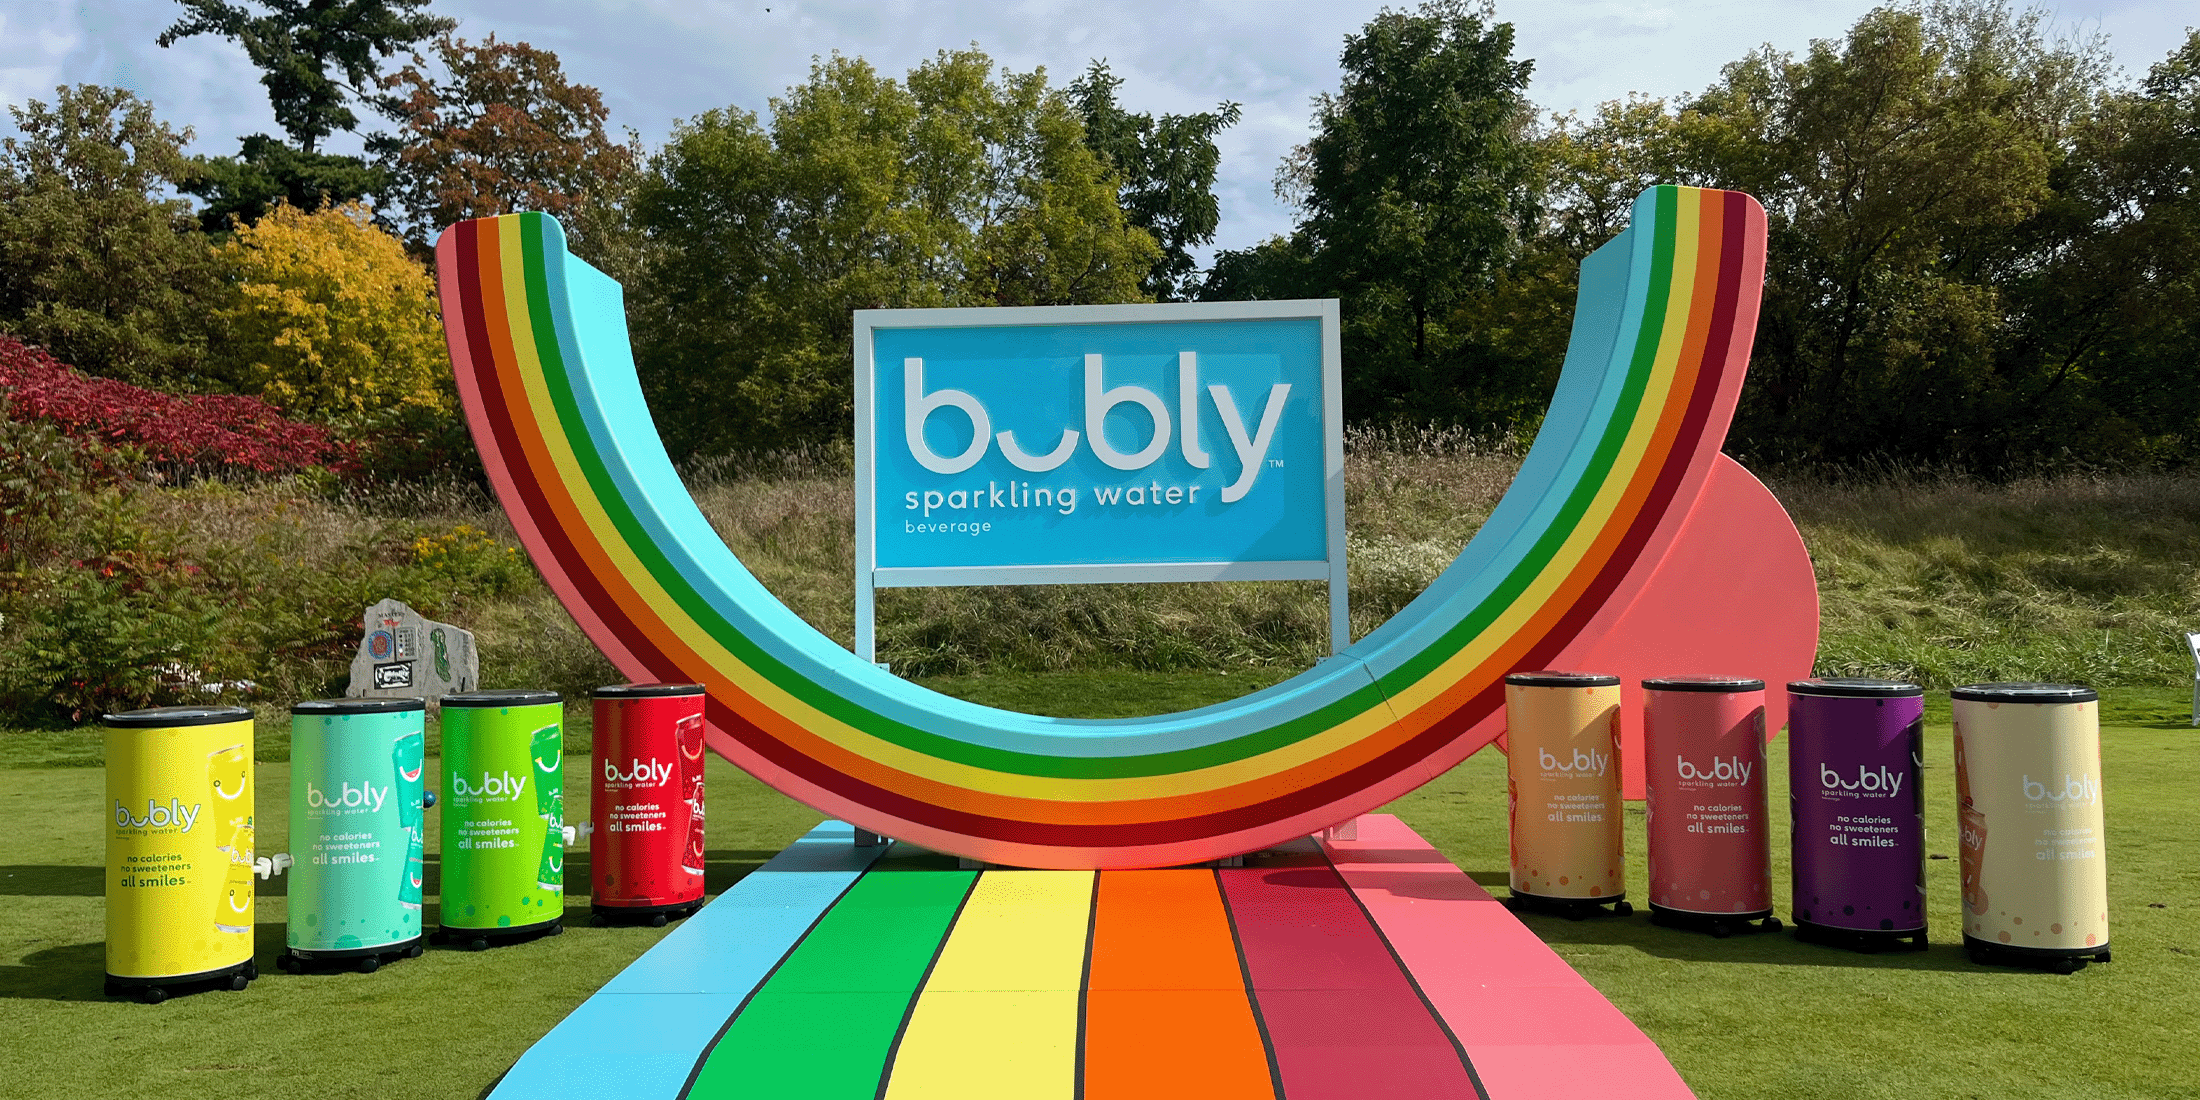 bubly sparkling water event